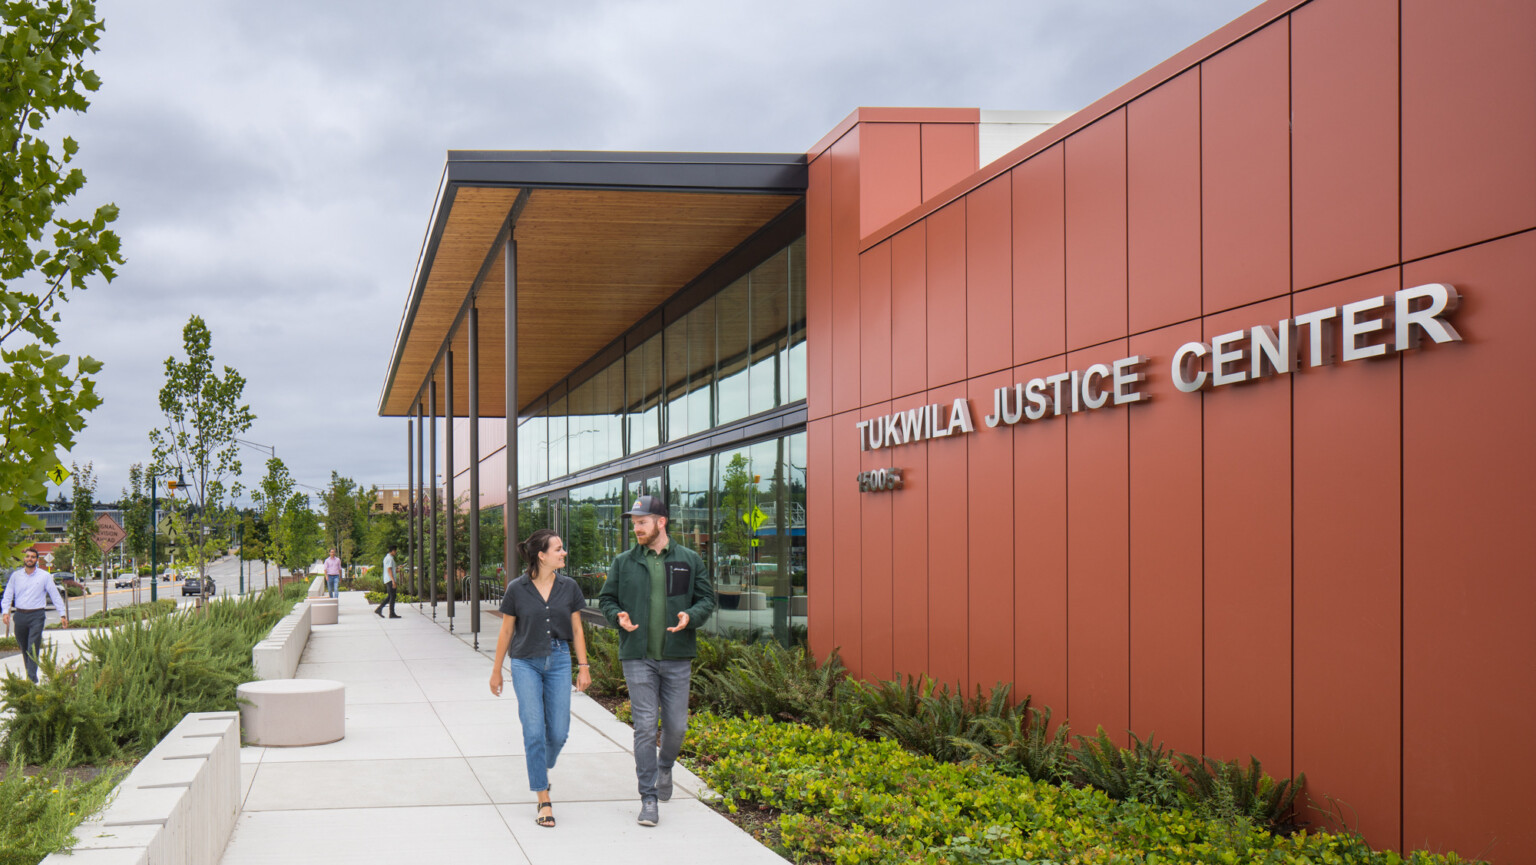 City of Tukwila Justice Center on overcast day, with landscaping in the foreground, trees, single-story double-height glass façade building, large signage, people strolling on front entrance walkway